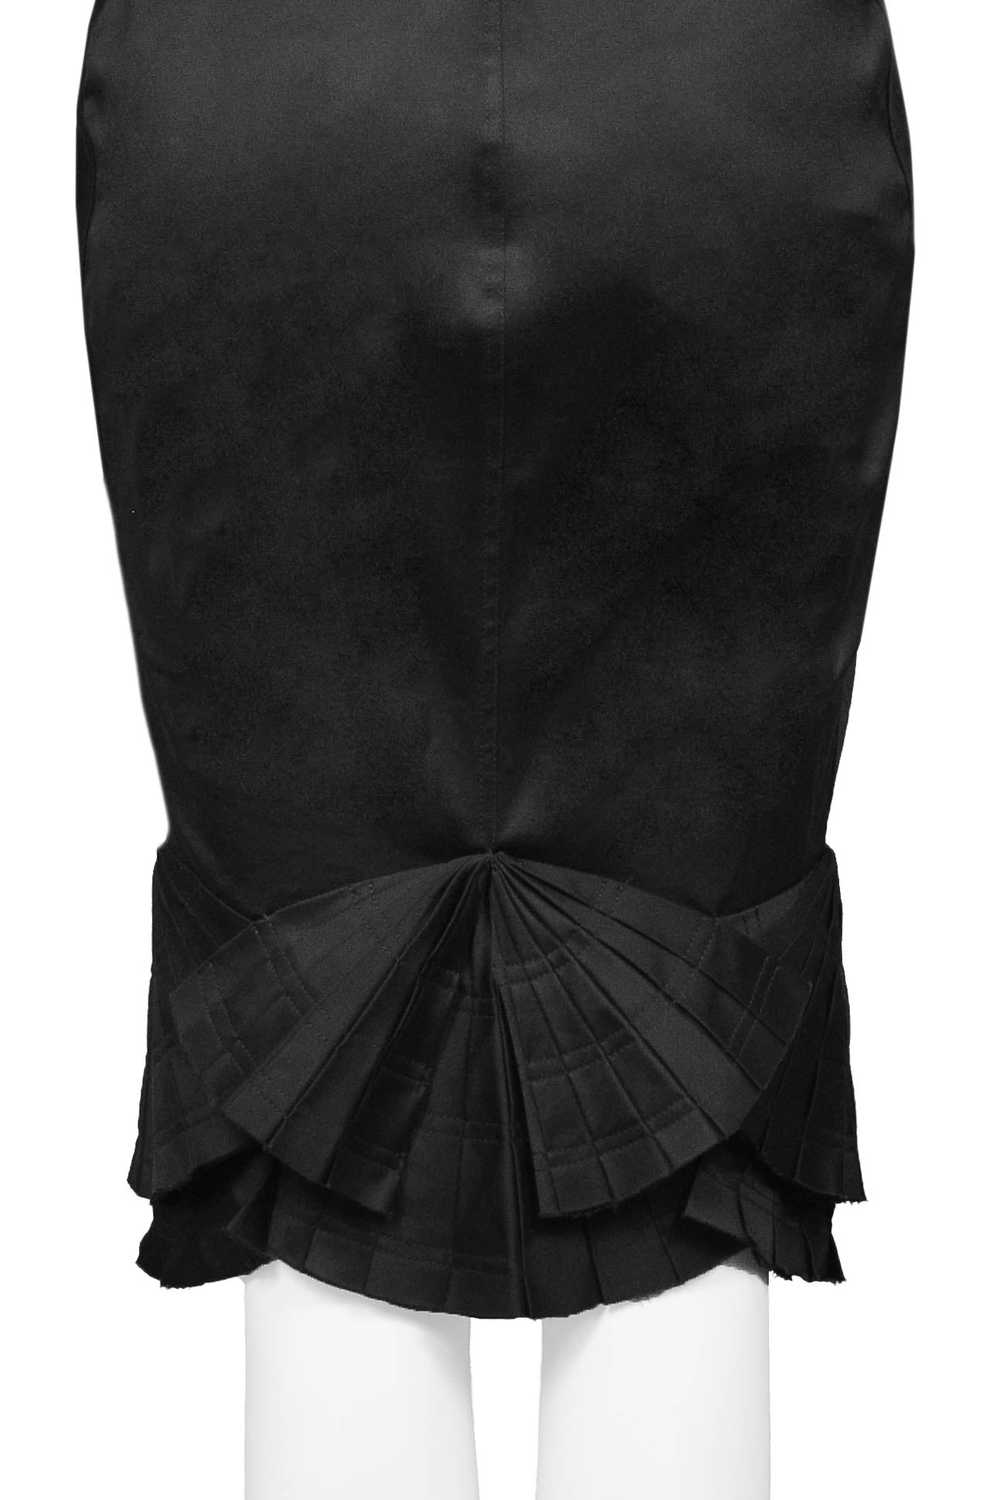 GUCCI BY TOM FORD BLACK DRESS WITH BACK PLEAT FAN… - image 4